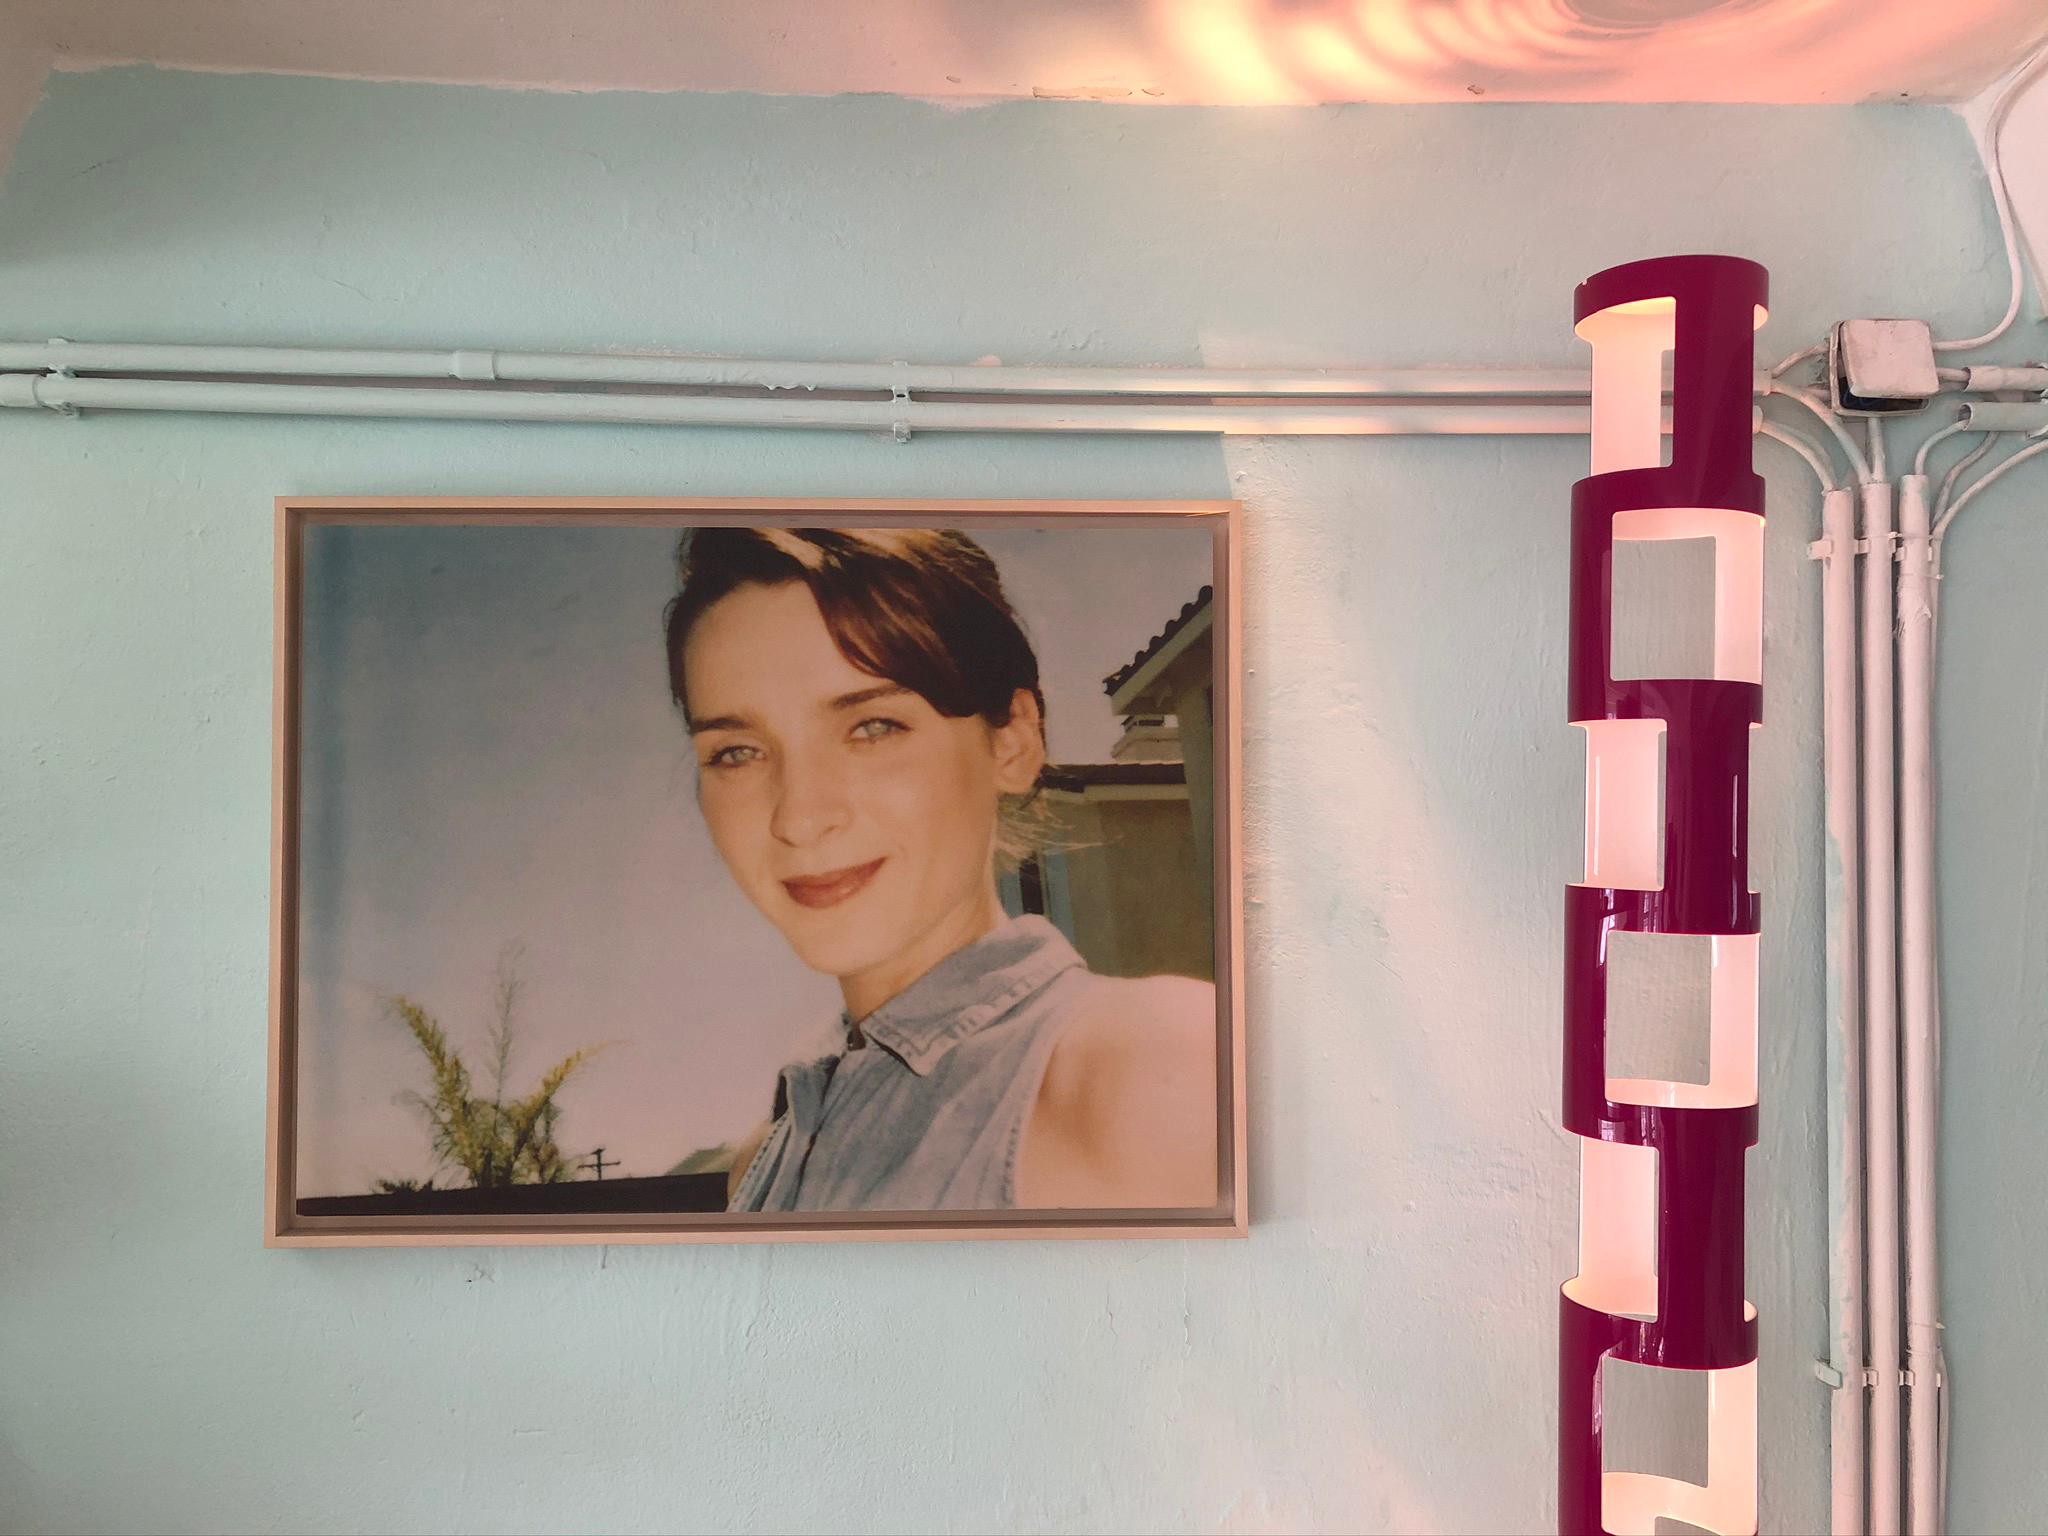 April blue Eyes (Suburbia) - mounted on Aluminum with shadow frame, analog - Photograph by Stefanie Schneider